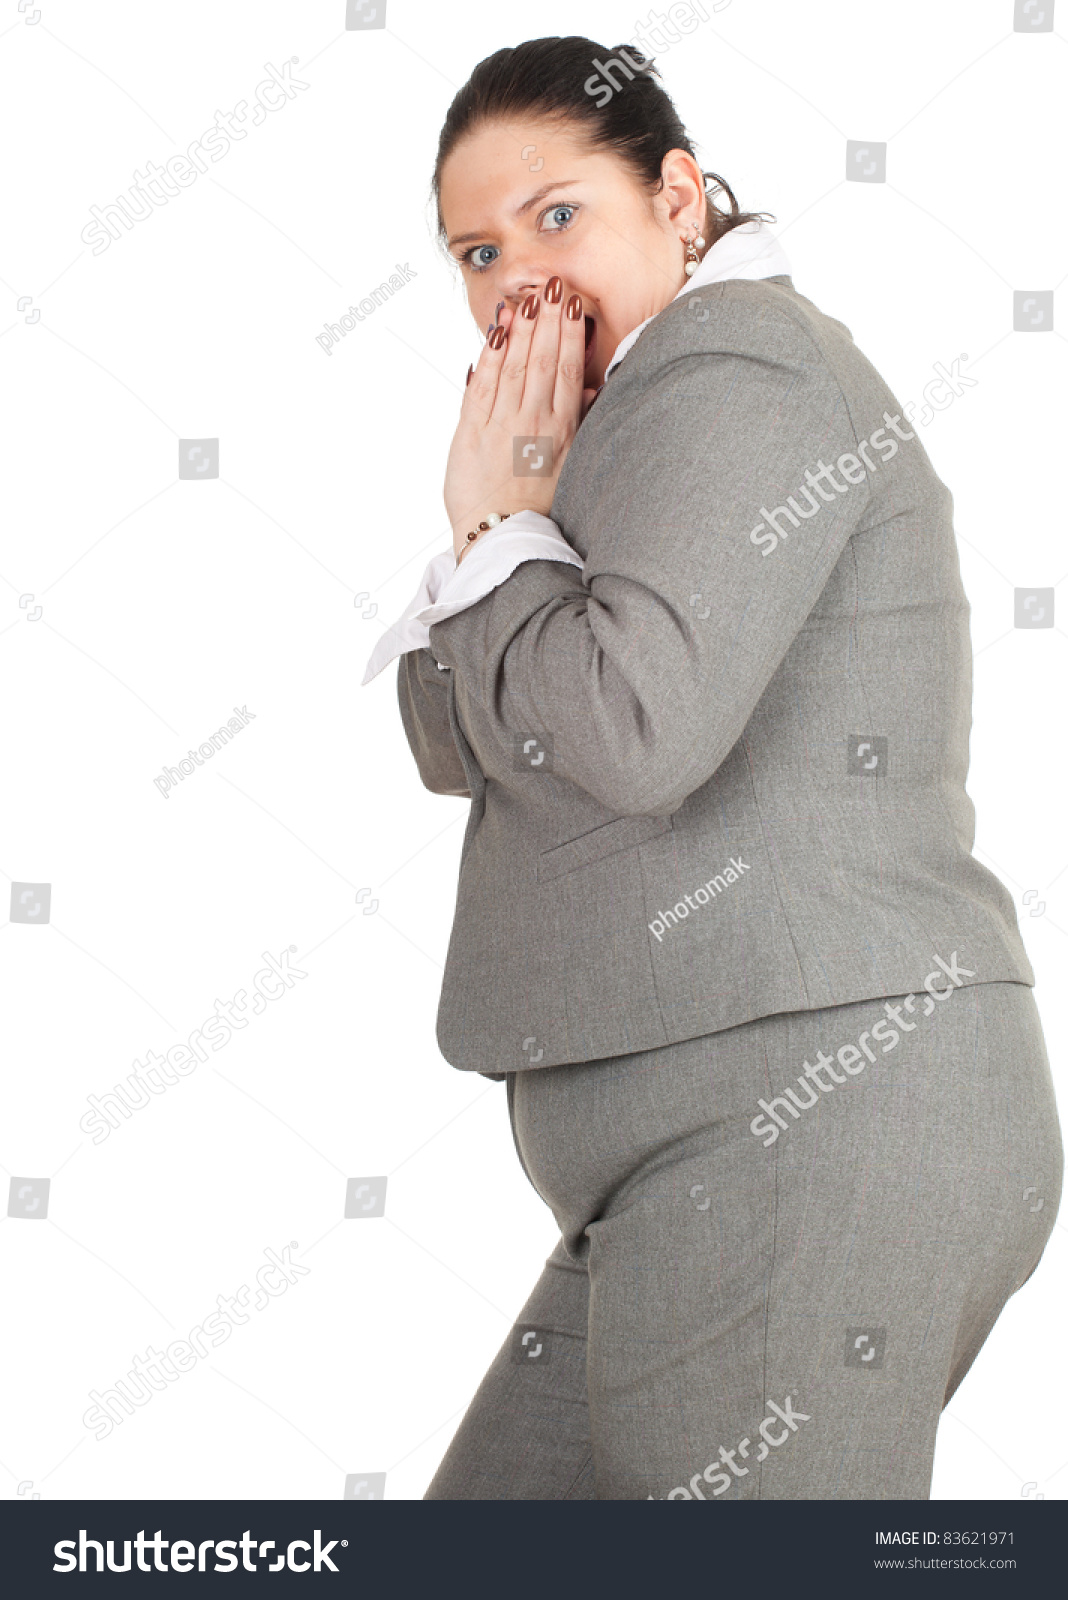 stock-photo-frightened-overweight-fat-businesswoman-in-grey-suit-series-83621971.jpg